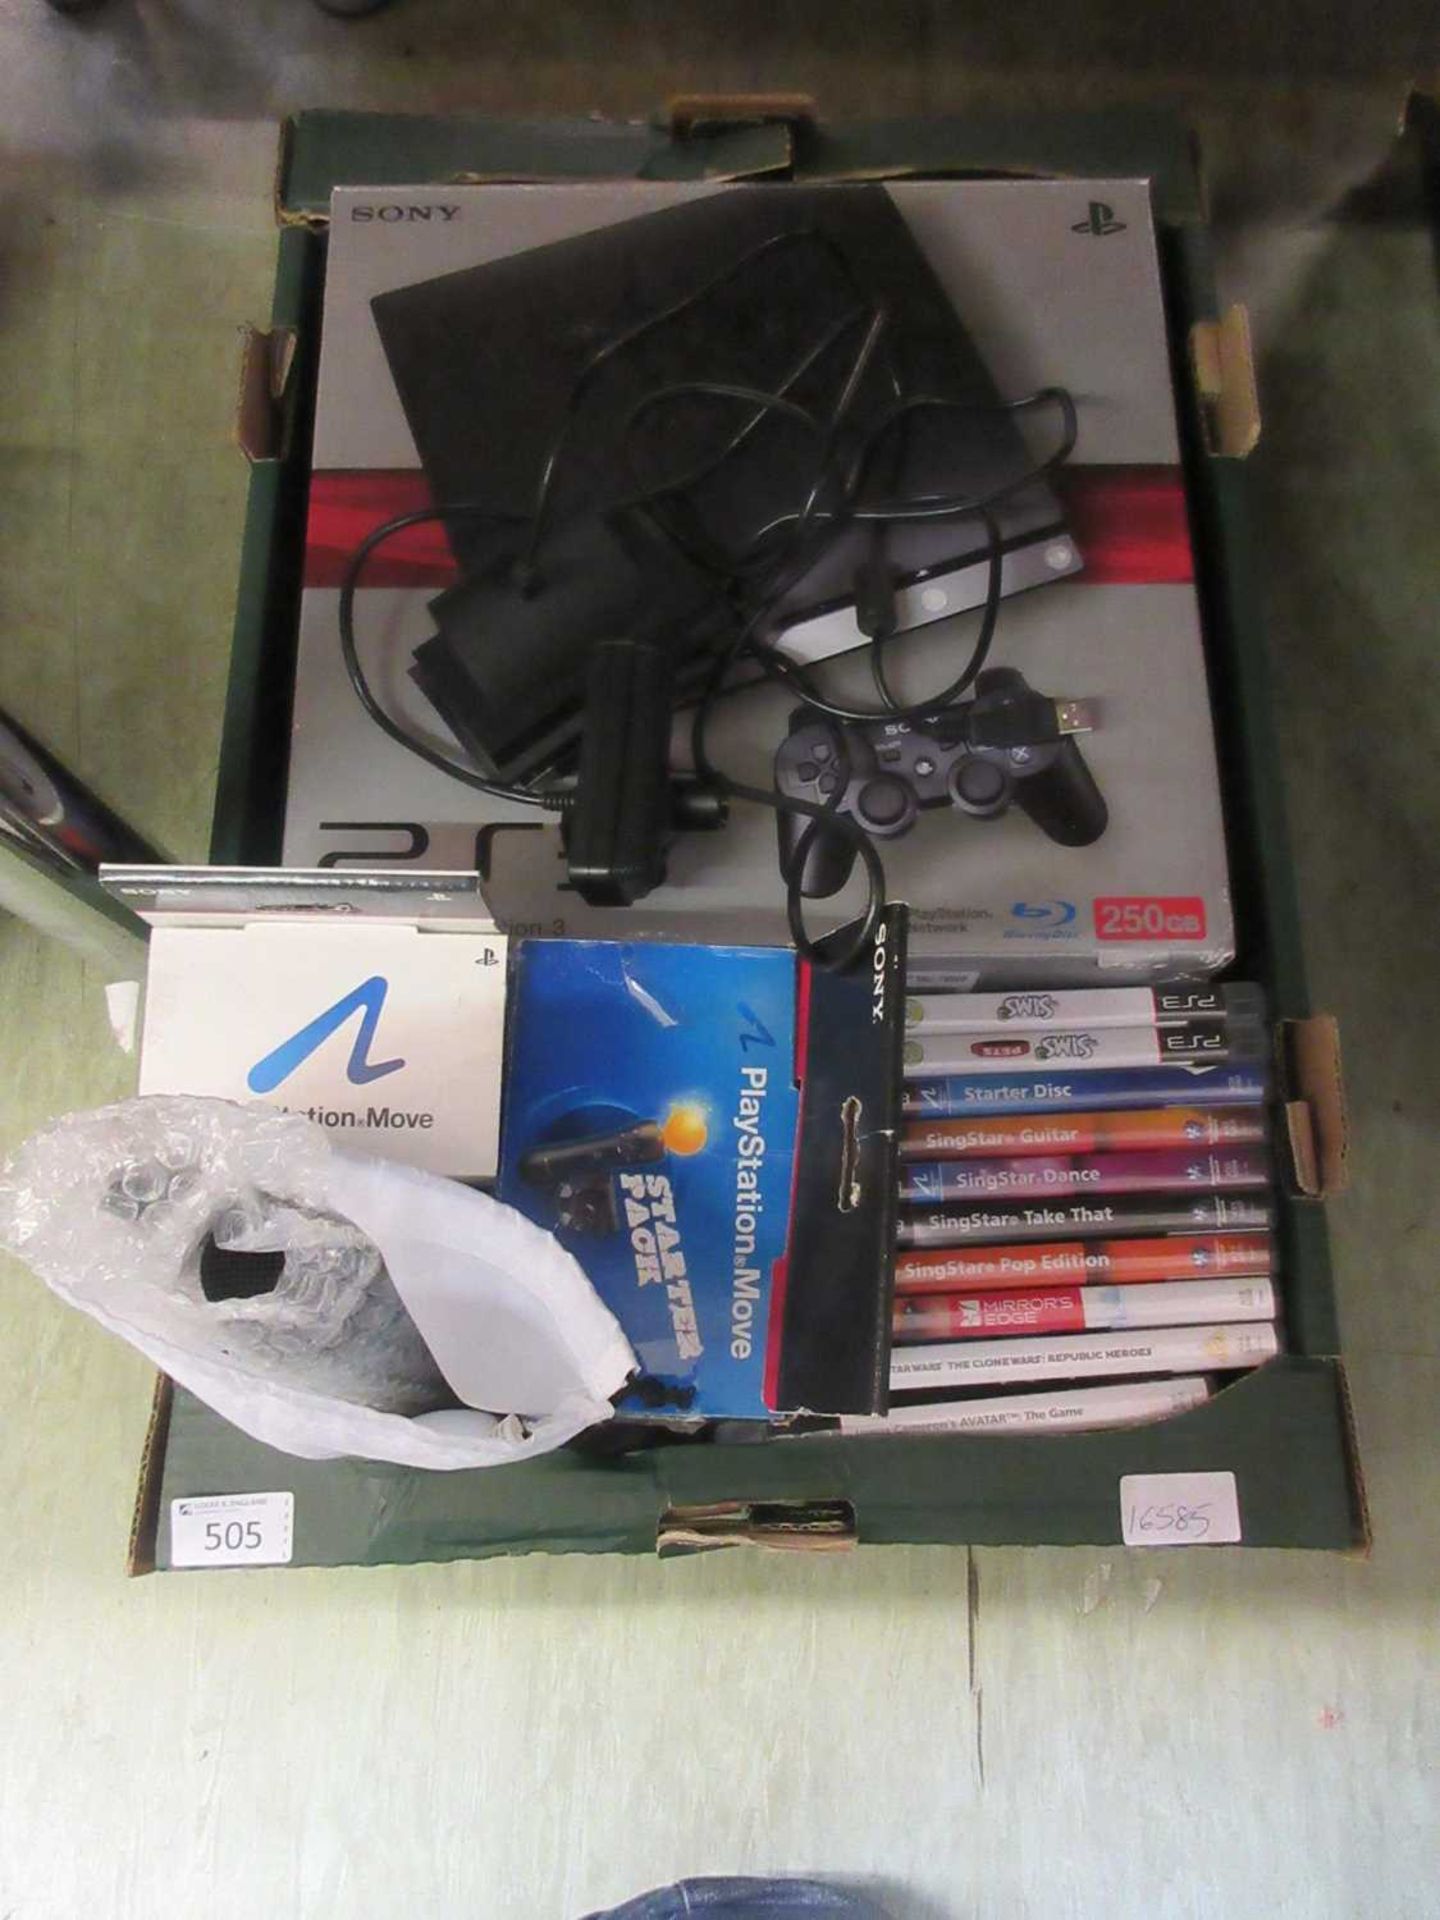 A box containing a Sony Playstation 3 with an assortment of games and accessories to include